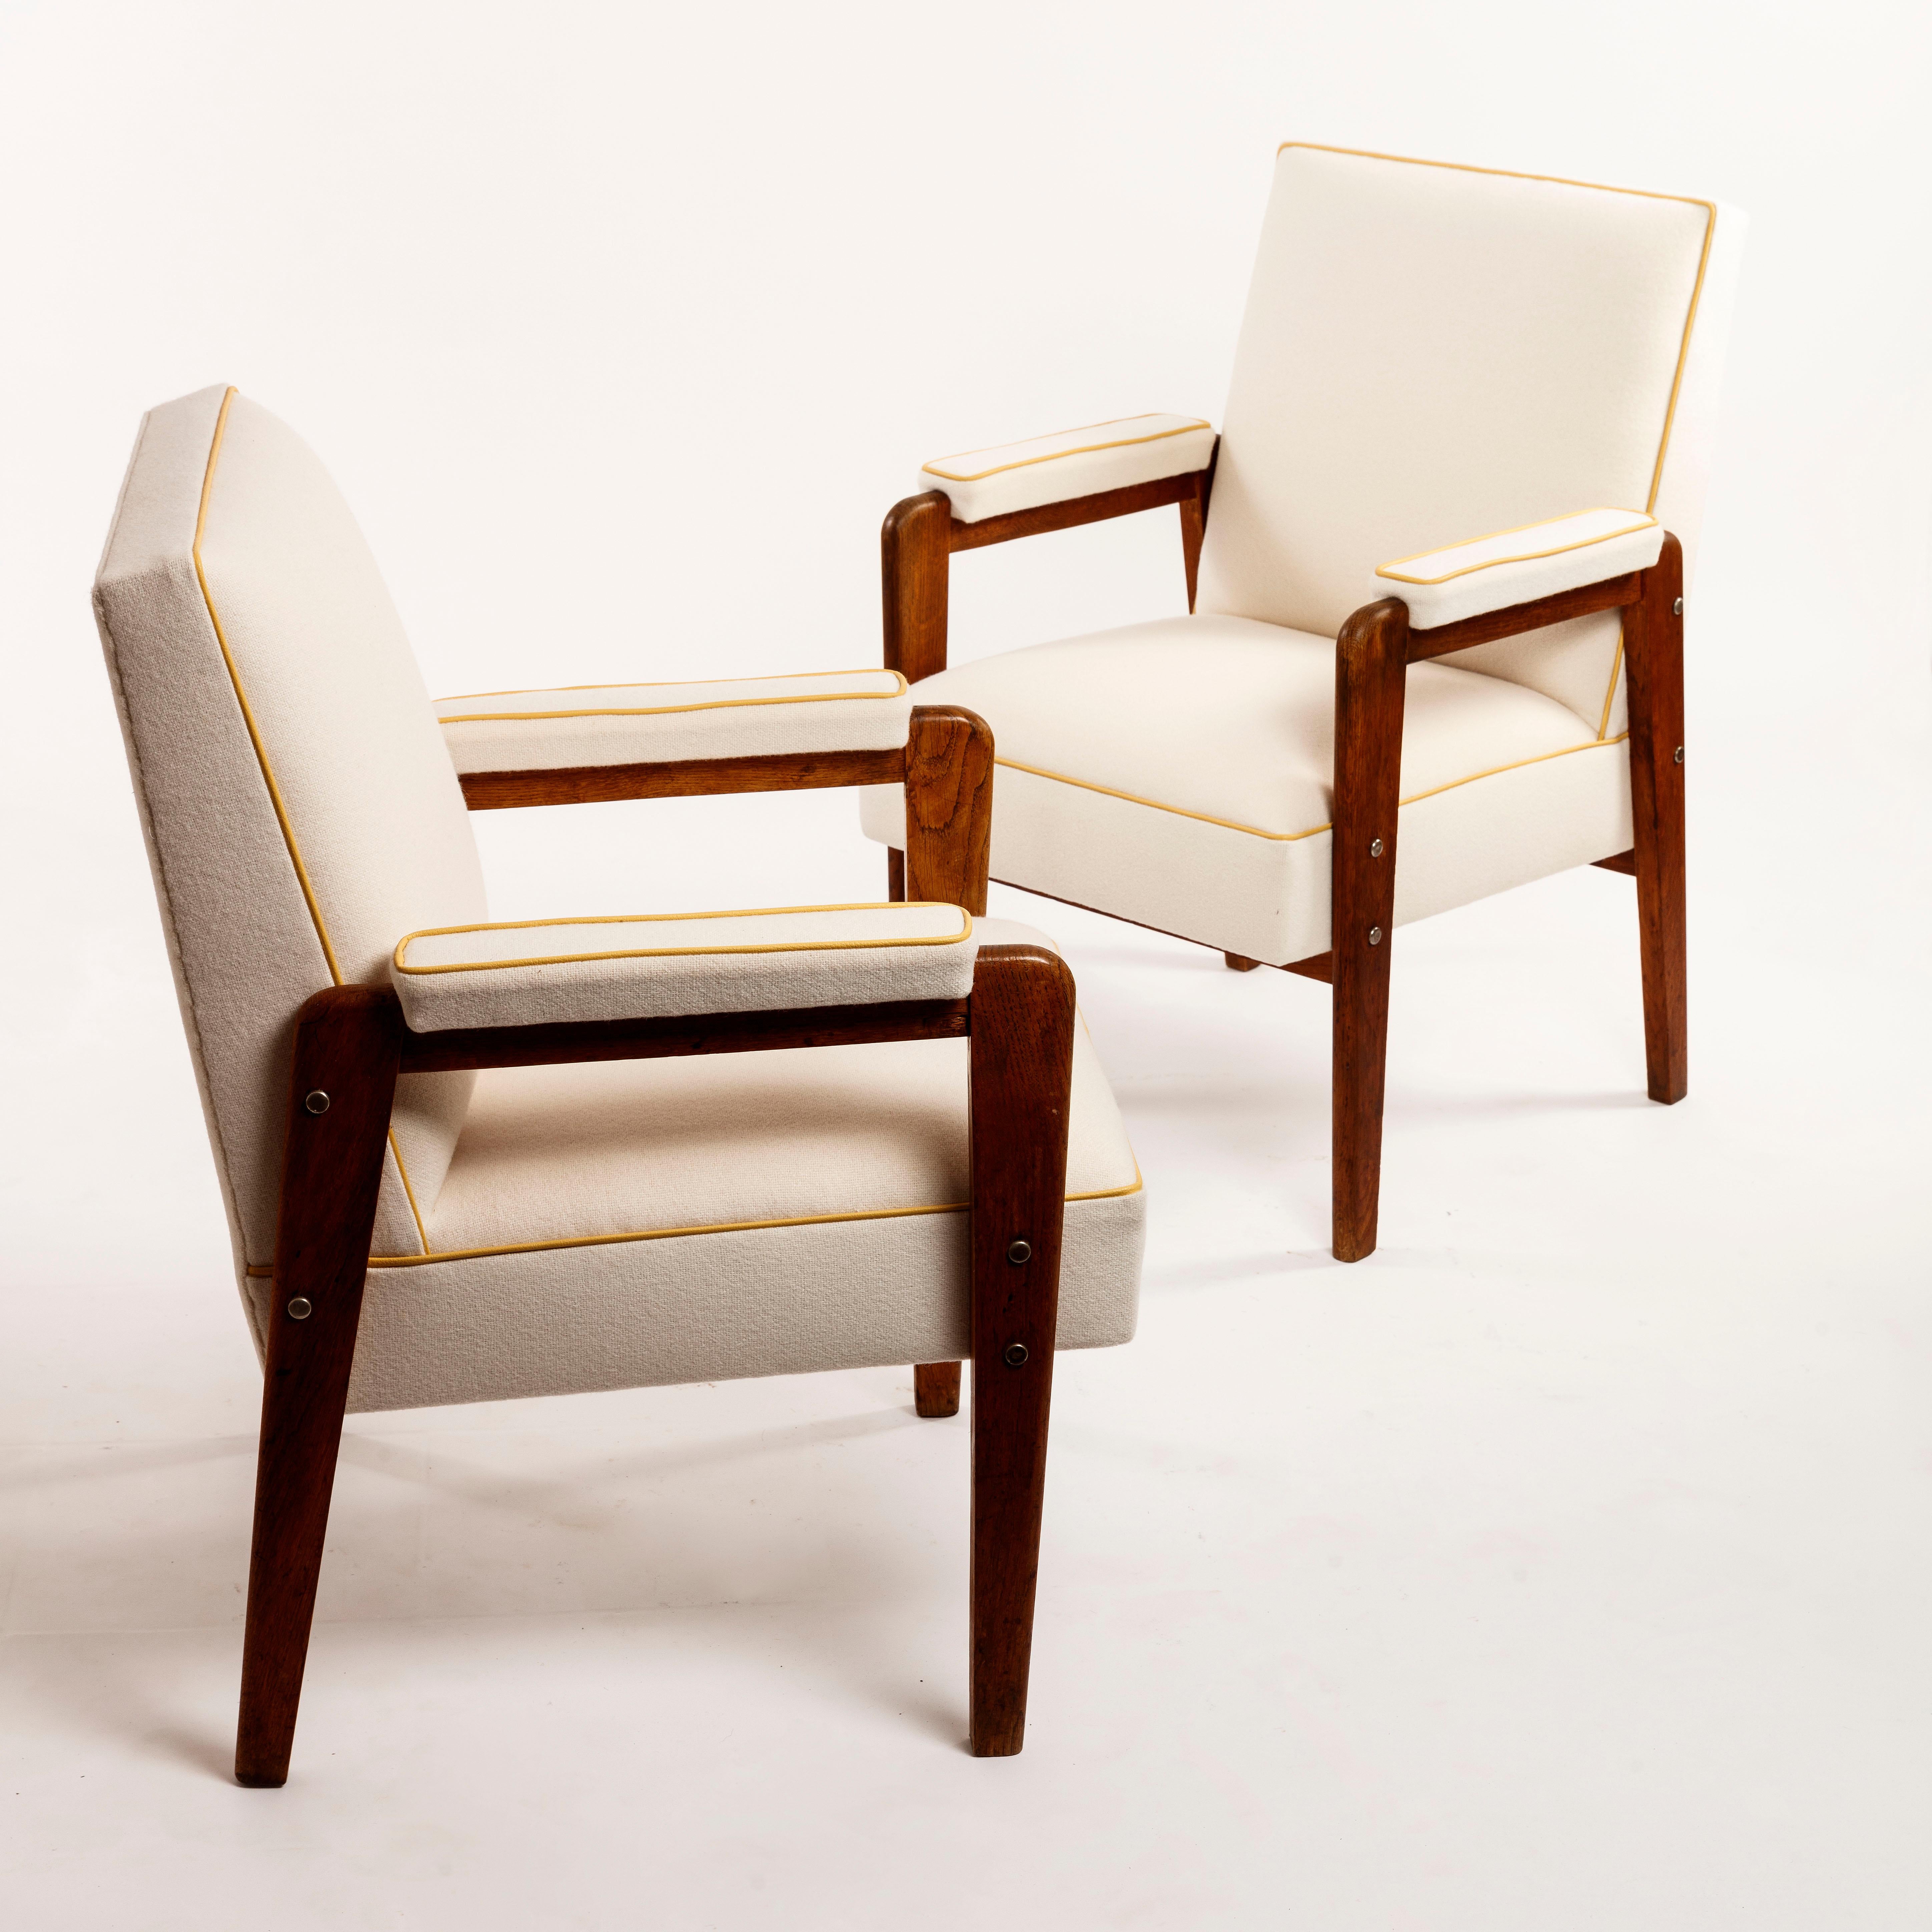 Marcel Gascoin Armchair Created in 1950 for the Cité Universitaire Antony France For Sale 9